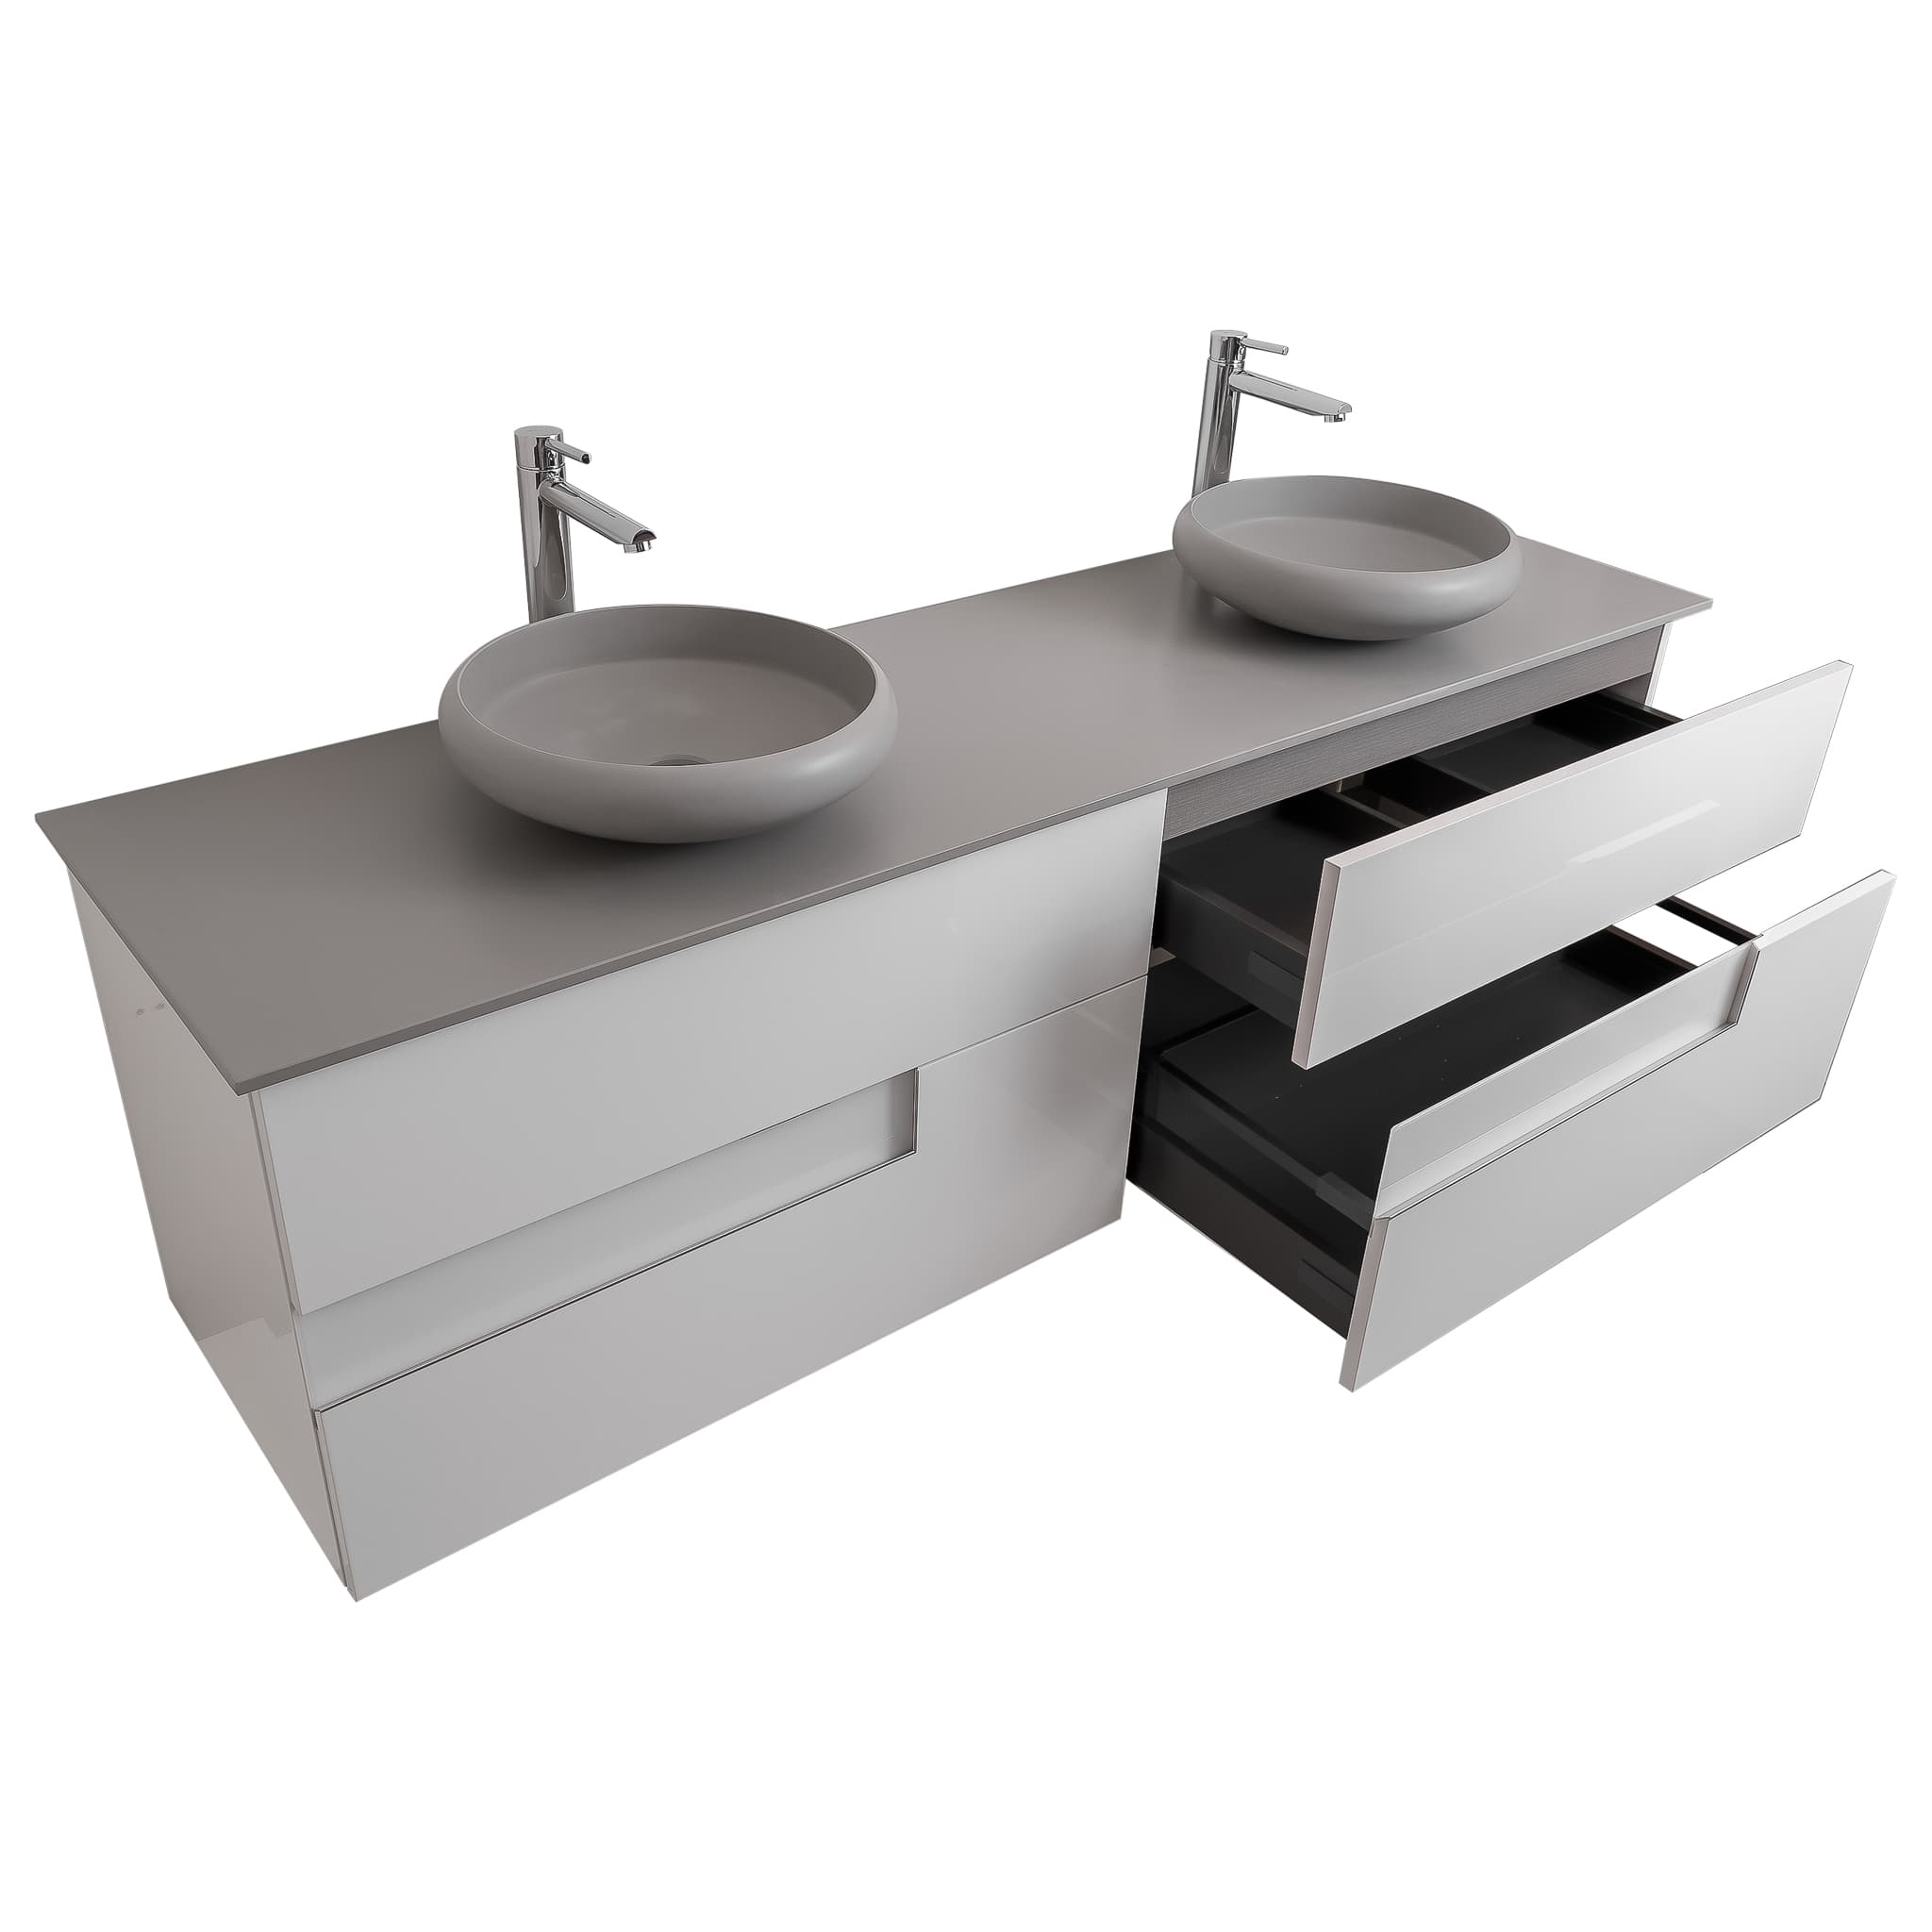 Vision 63 White High Gloss Cabinet, Solid Surface Flat Grey Counter And Two Round Solid Surface Grey Basin 1153, Wall Mounted Modern Vanity Set